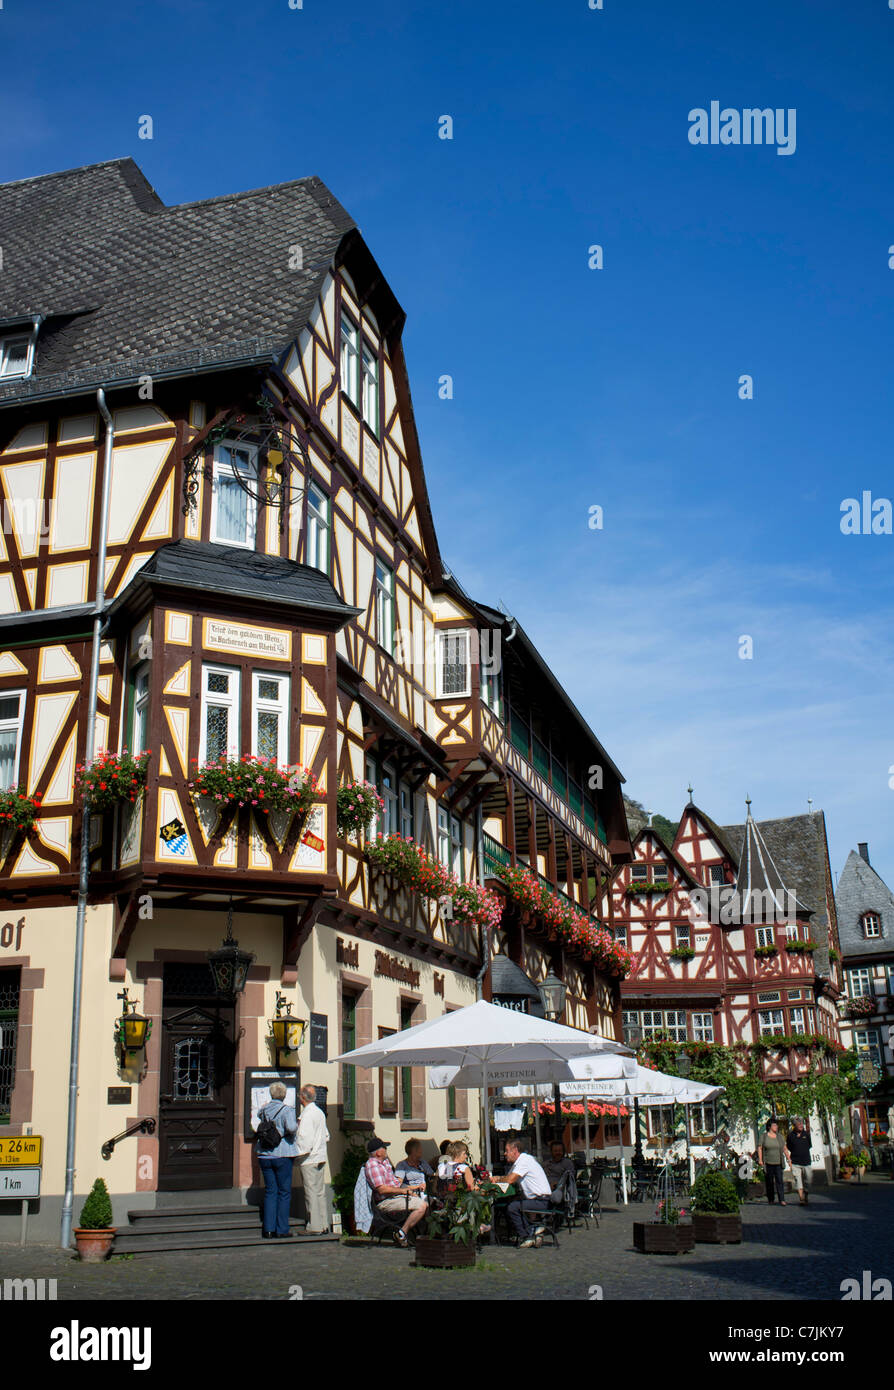 Old half timbered buildings in Bacharach in Rhineland beside River Rhine Germany Stock Photo